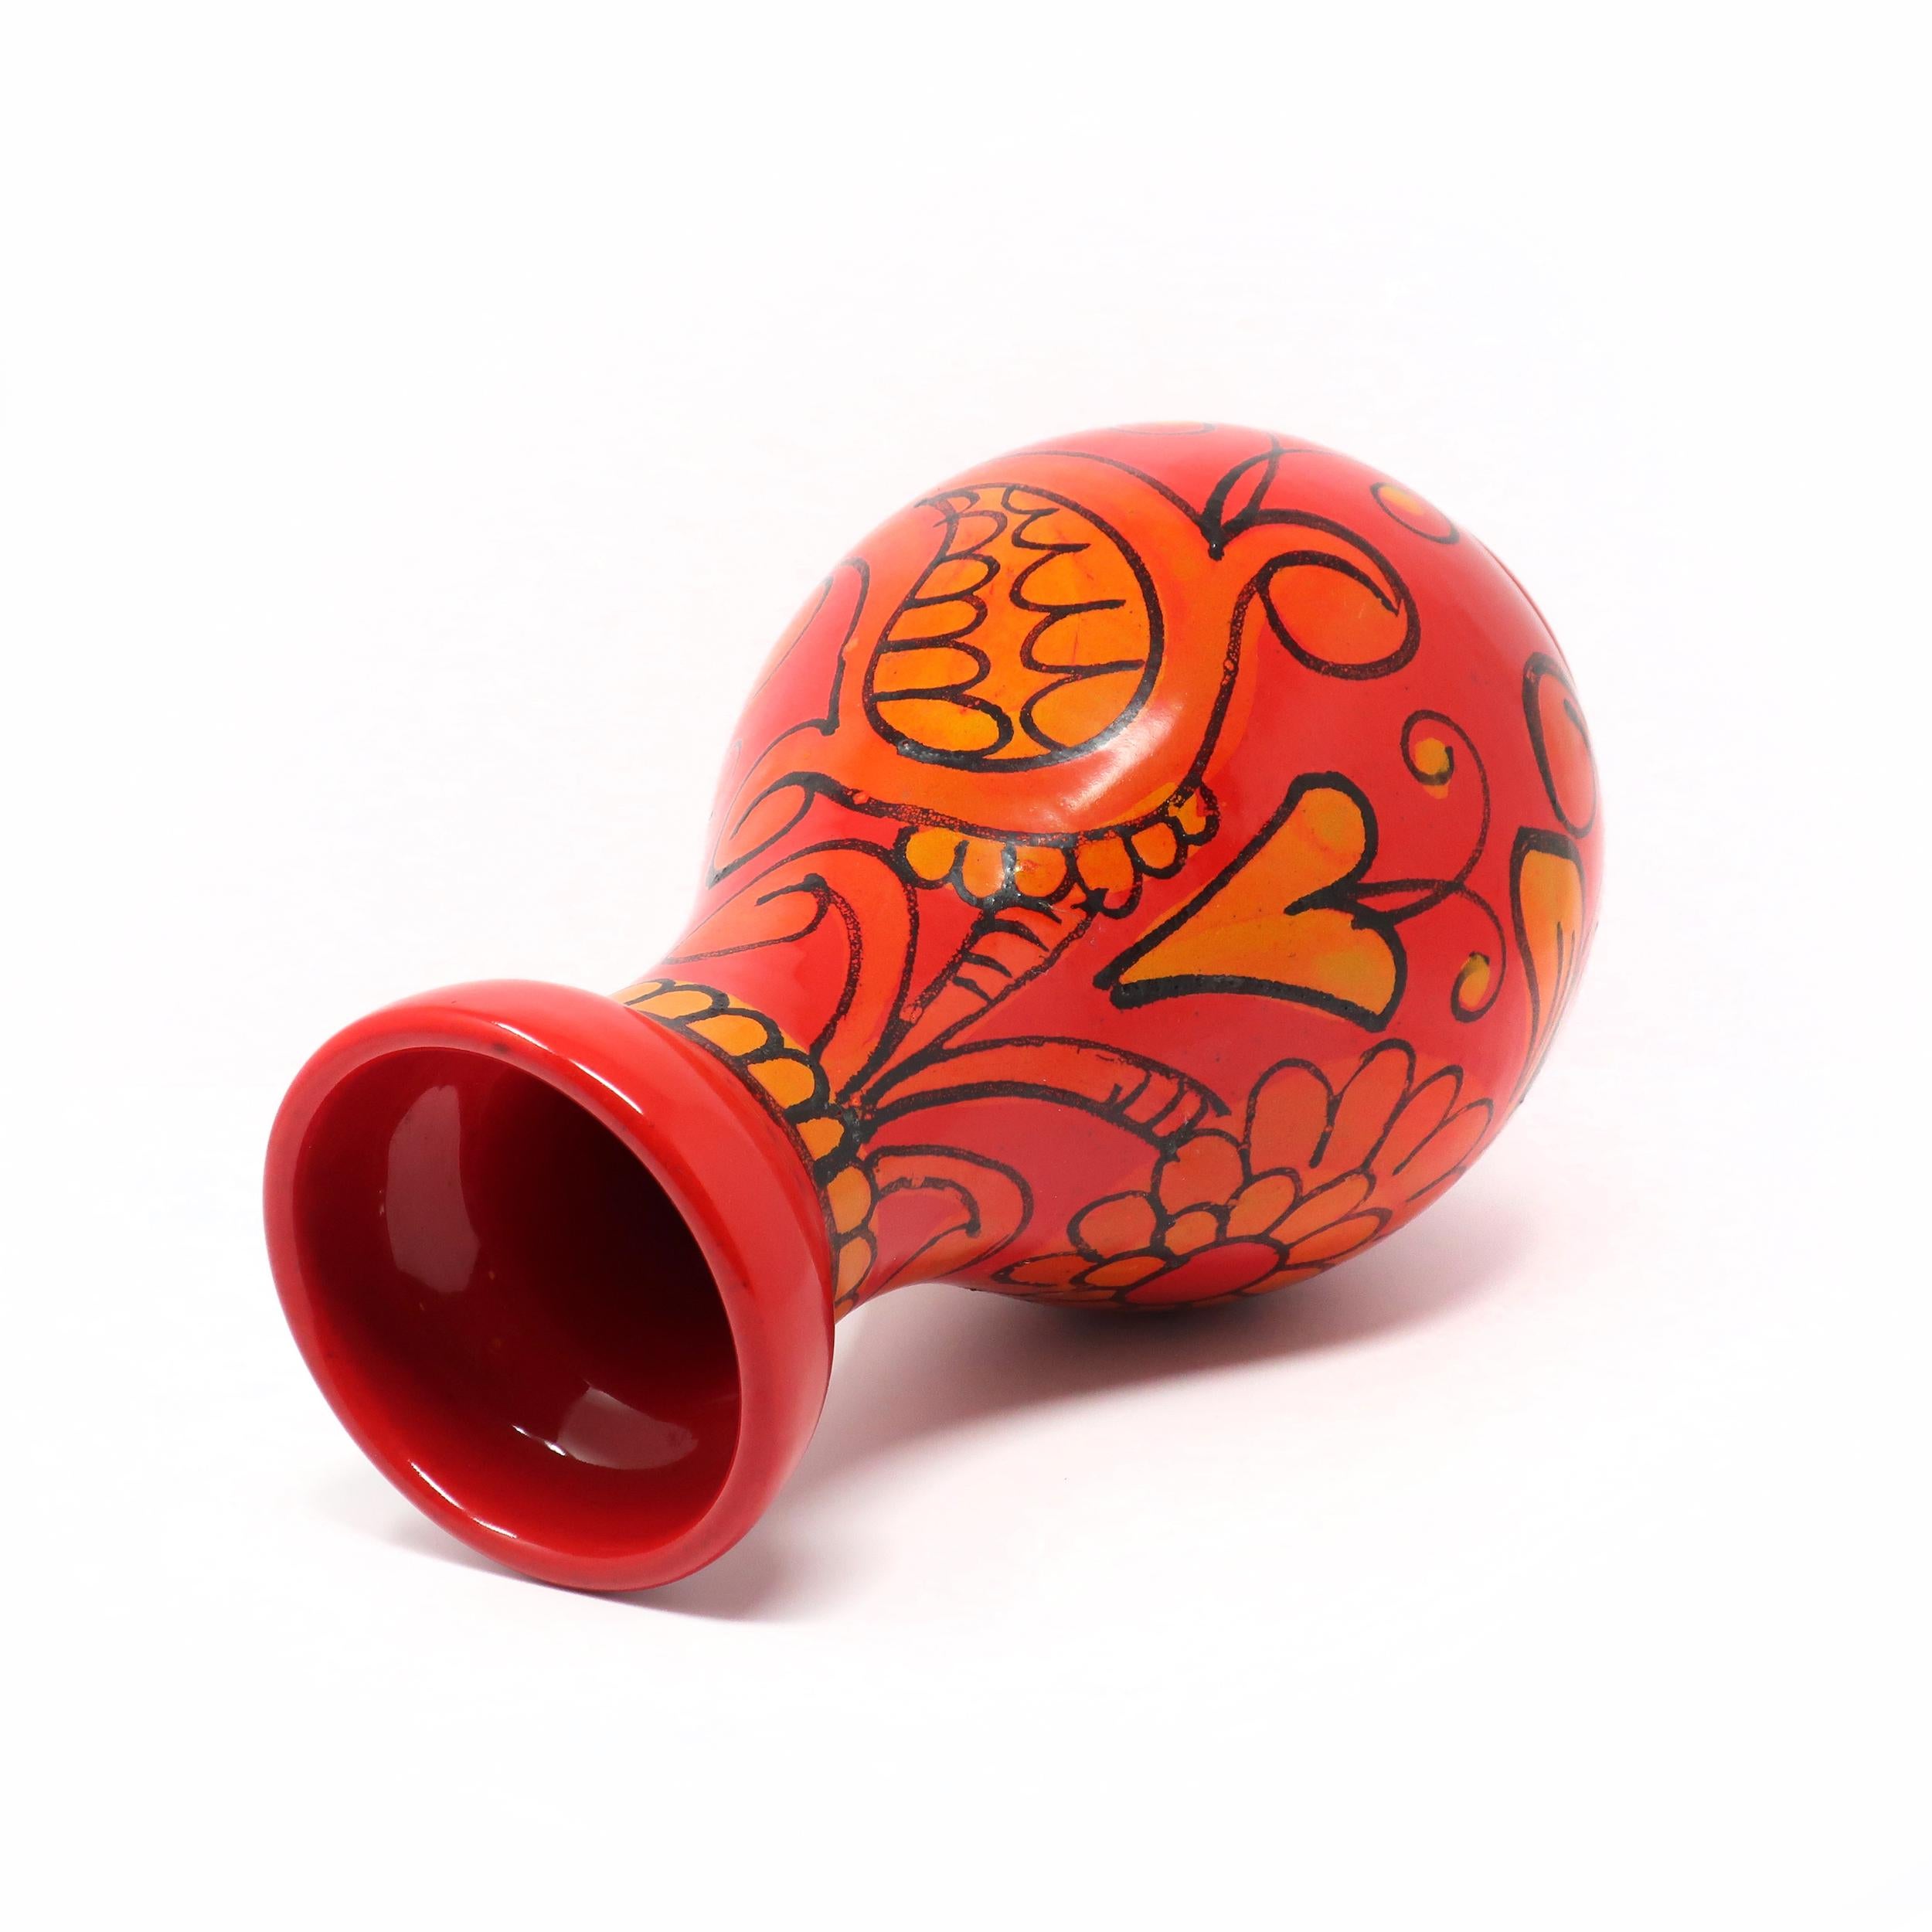 Vintage Italian Modern Red Ceramic Vase by Bitossi In Good Condition For Sale In Brooklyn, NY